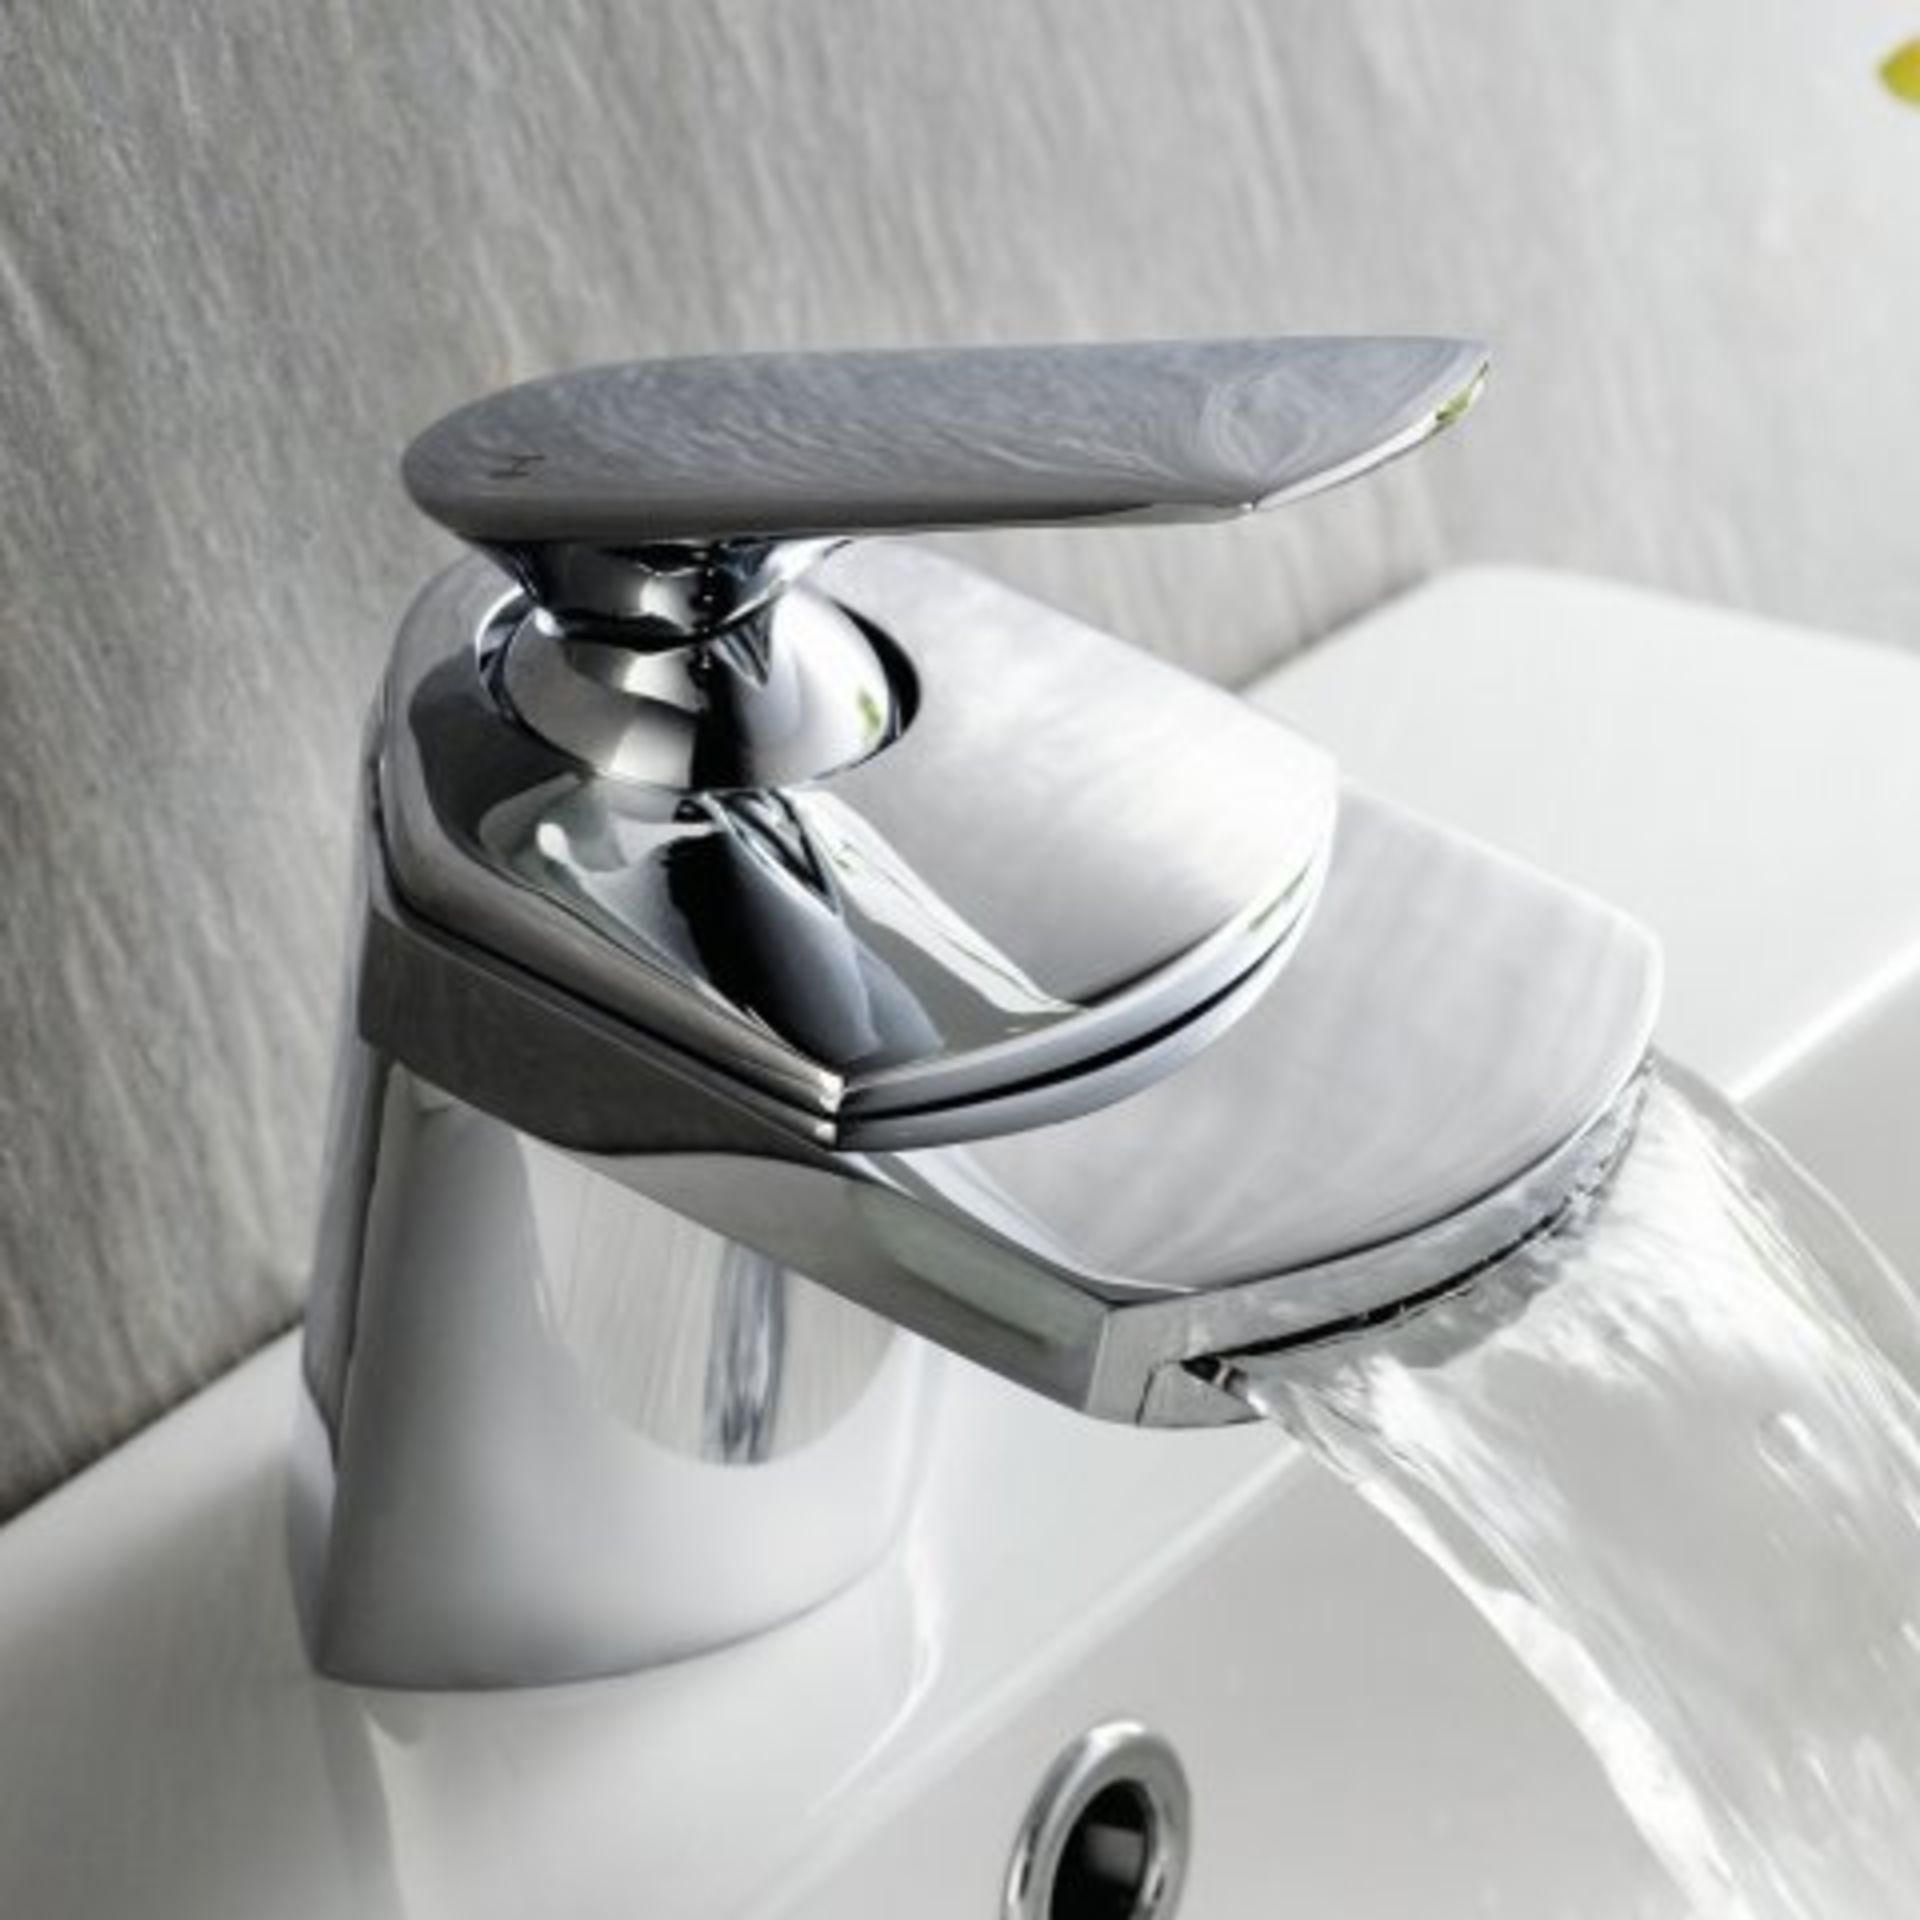 (I99) Oshi Waterfall Basin Mixer Tap Assured Performance Maintenance free technology is incorporated